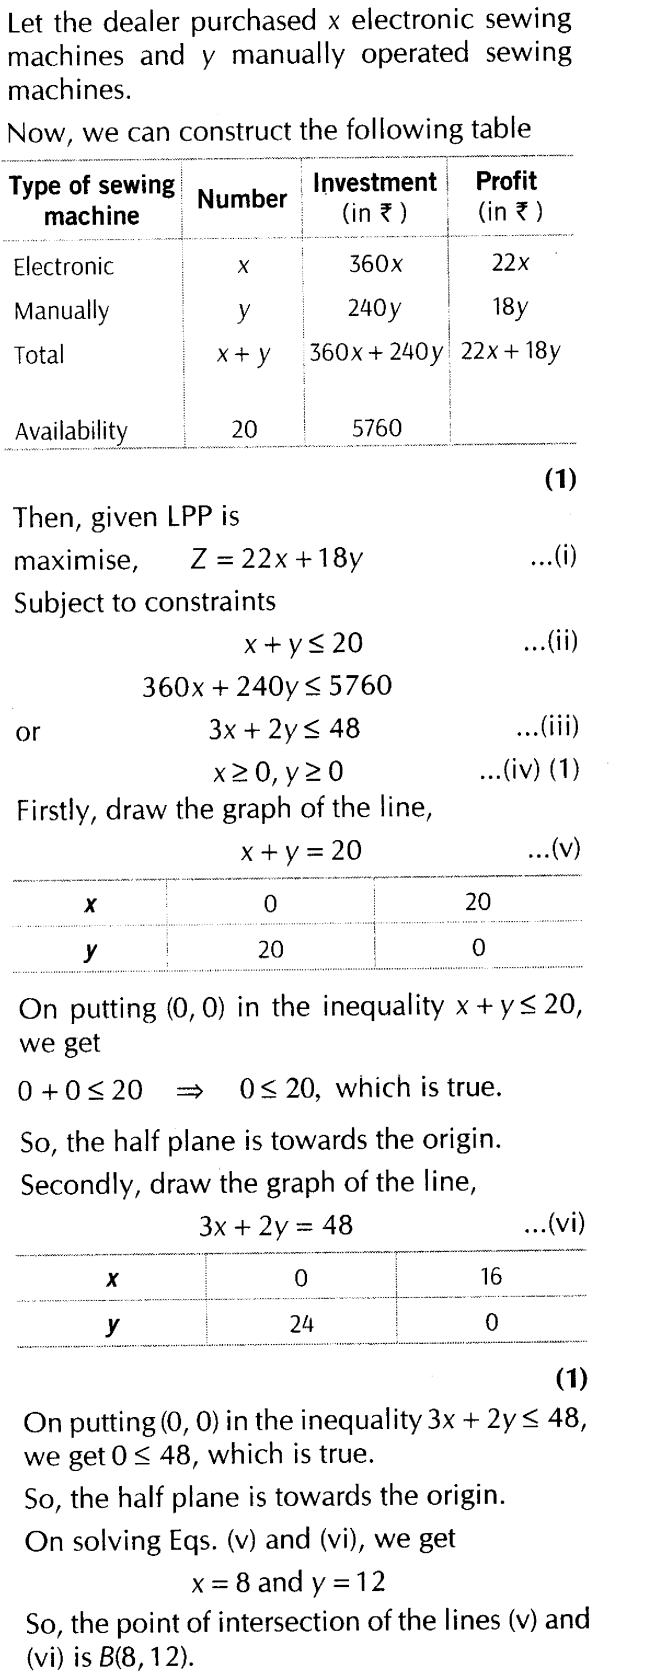 important-questions-for-class-12-maths-cbse-linear-programming-t1-q-4Sjpg_Page1